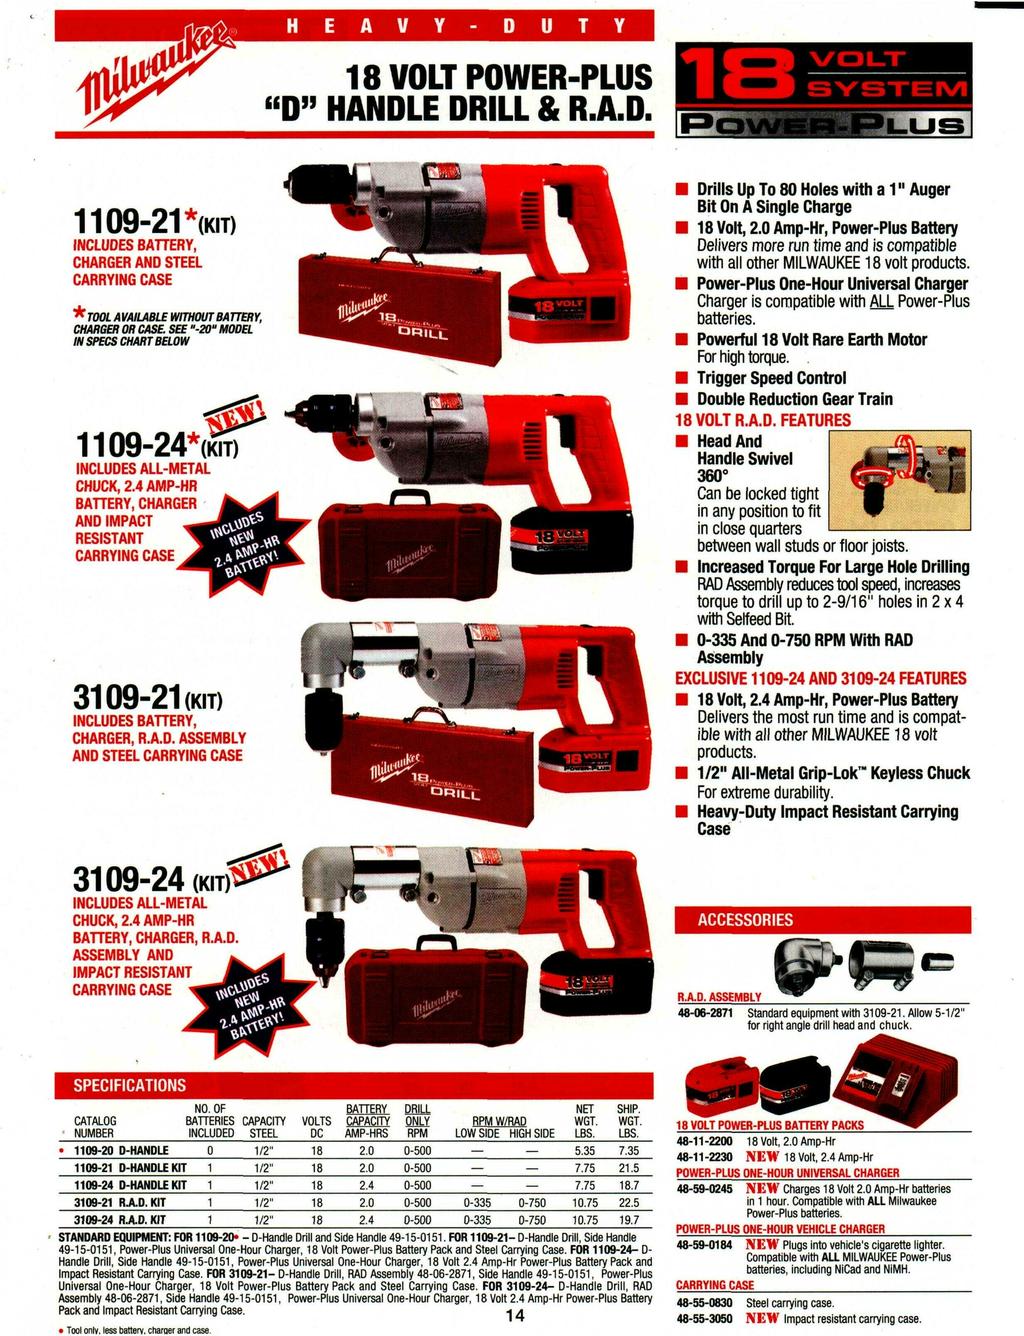 ',, H E A V Y 0 U T Y "D" HANDLE DRILL & R.A.D.. 110921 * (KIT) INClUDES BATTERY, CHARGER AND STEEL * TOOL AVAILABLE WITHOIJT BATTERY, CHARGER OR CASE.